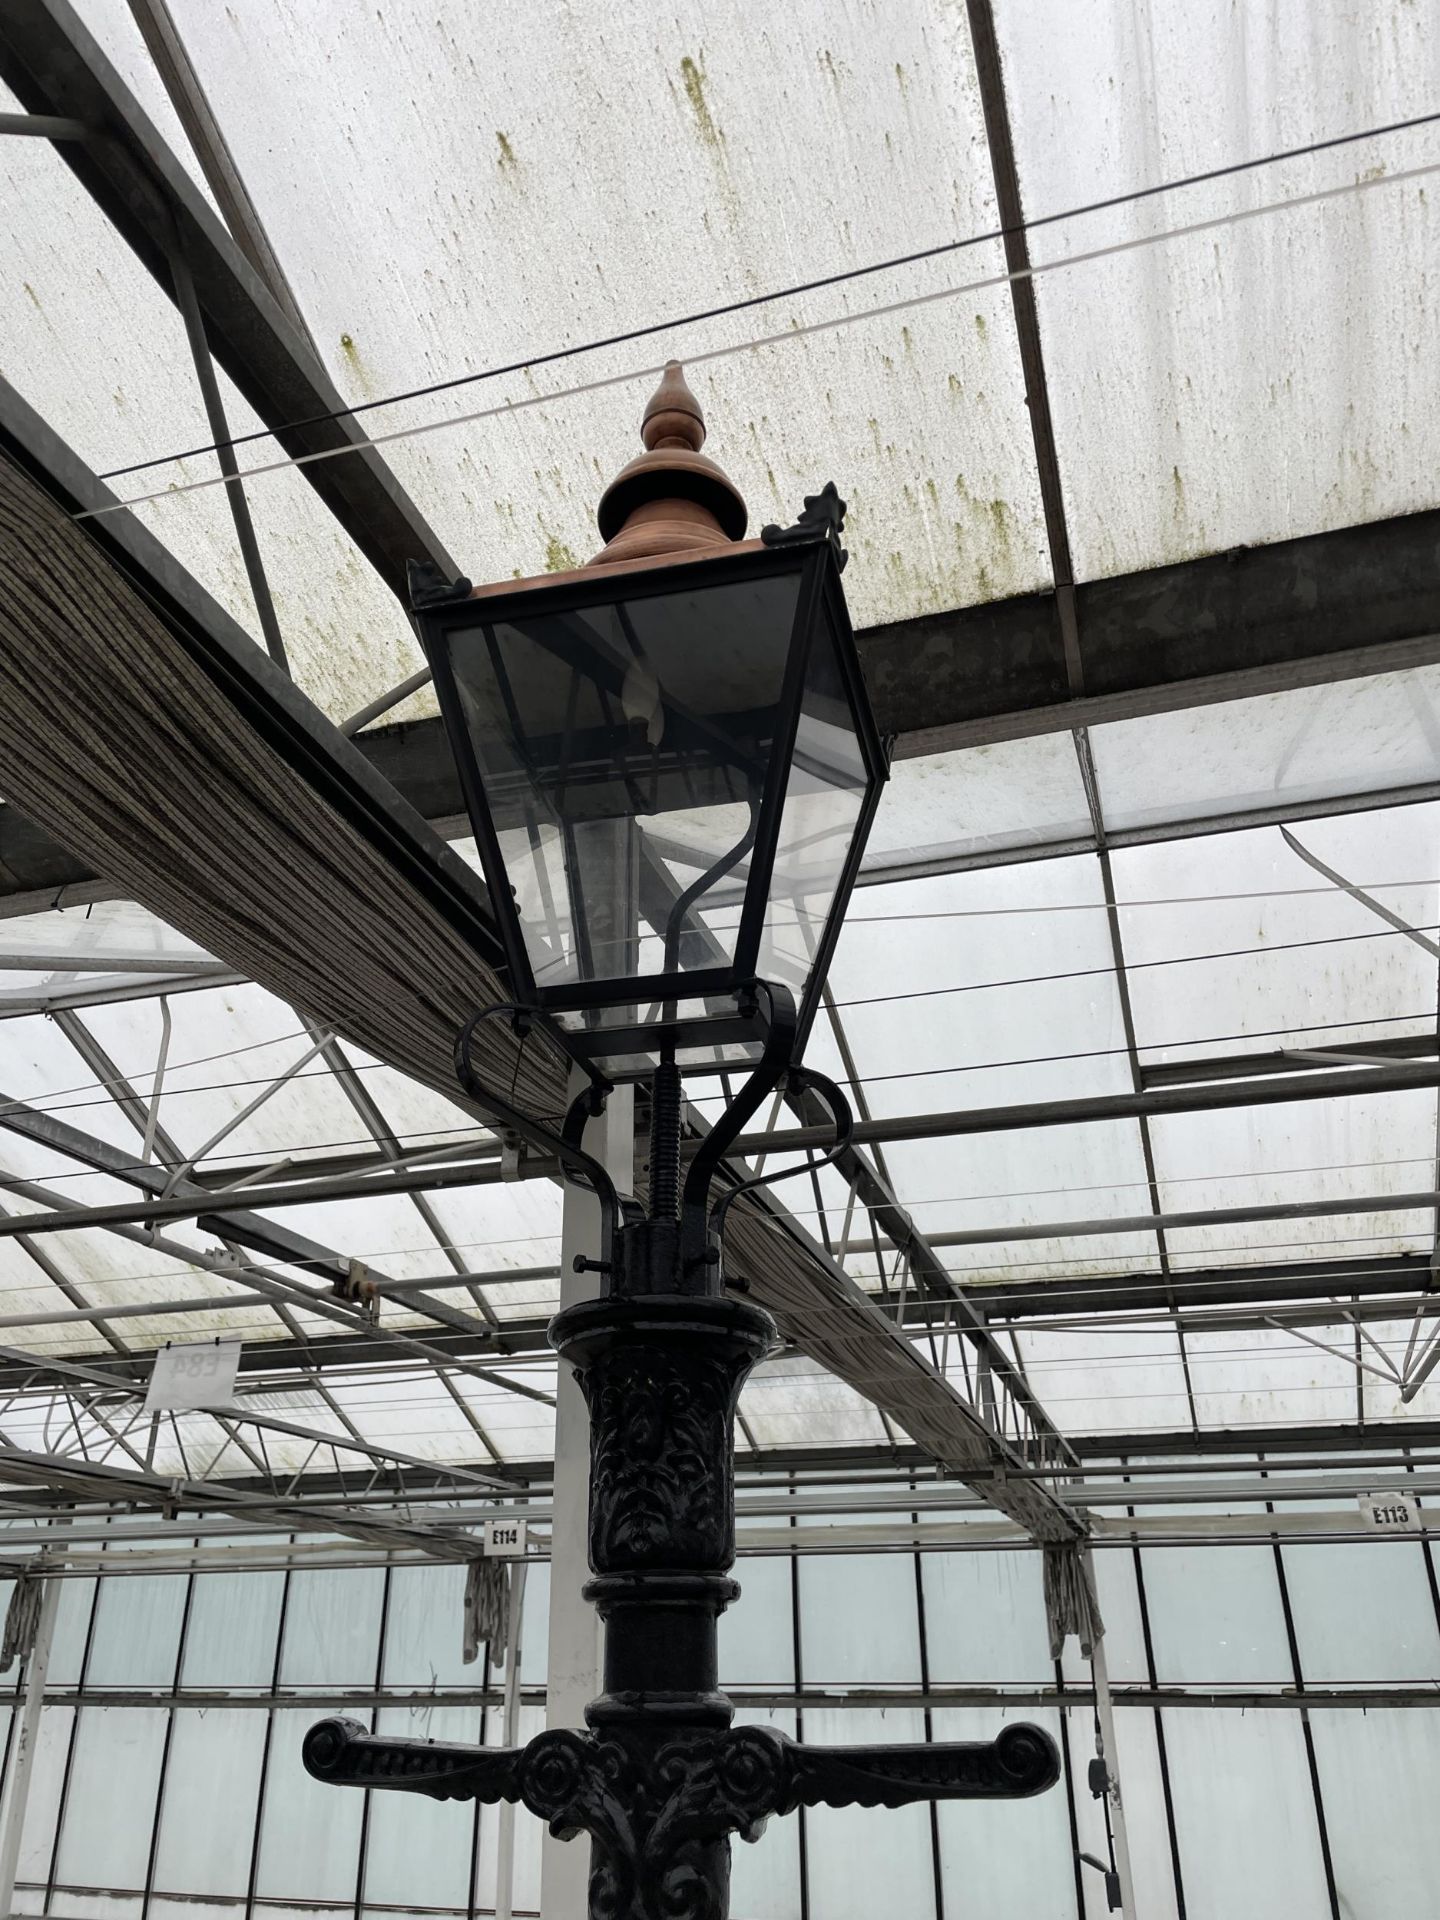 A VINTAGE DECORATIVE CAST ALLOY ELECTRIC STREET LAMP POST WITH COPPER TOP - Image 2 of 4